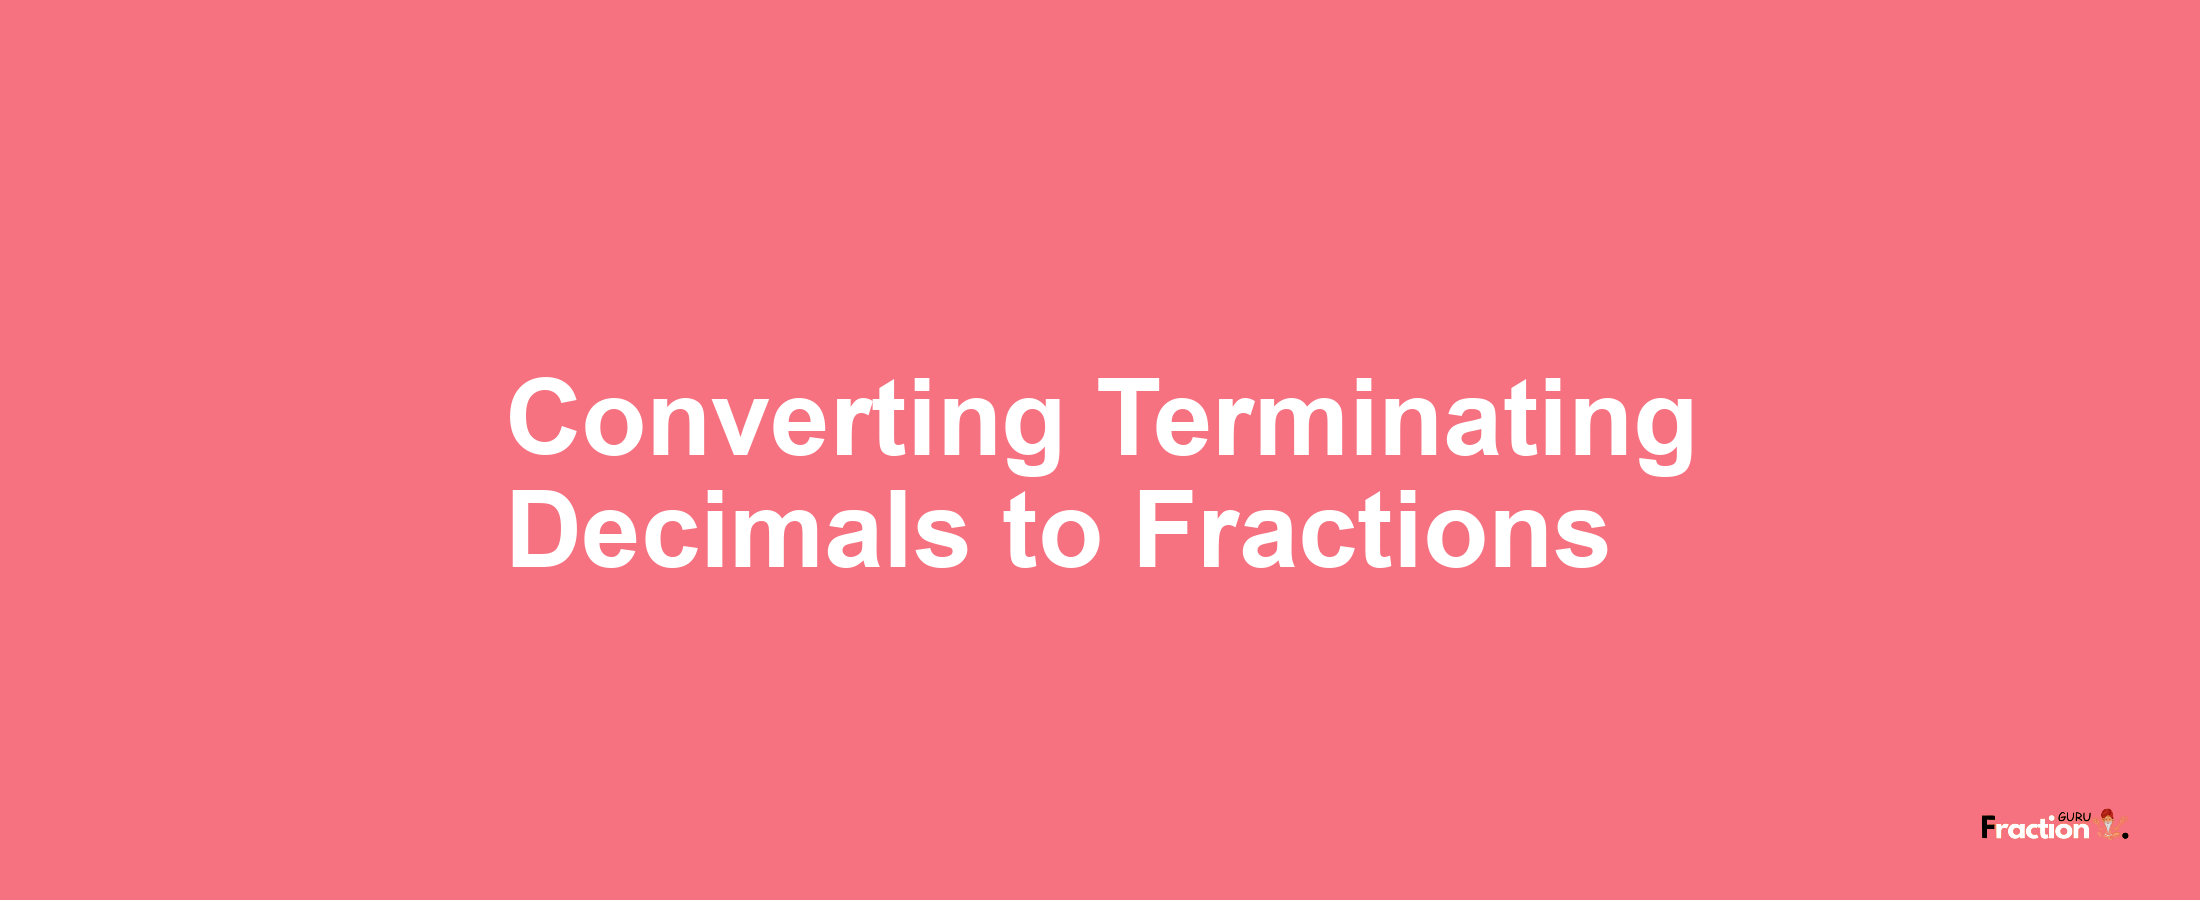 Converting Terminating Decimals to Fractions